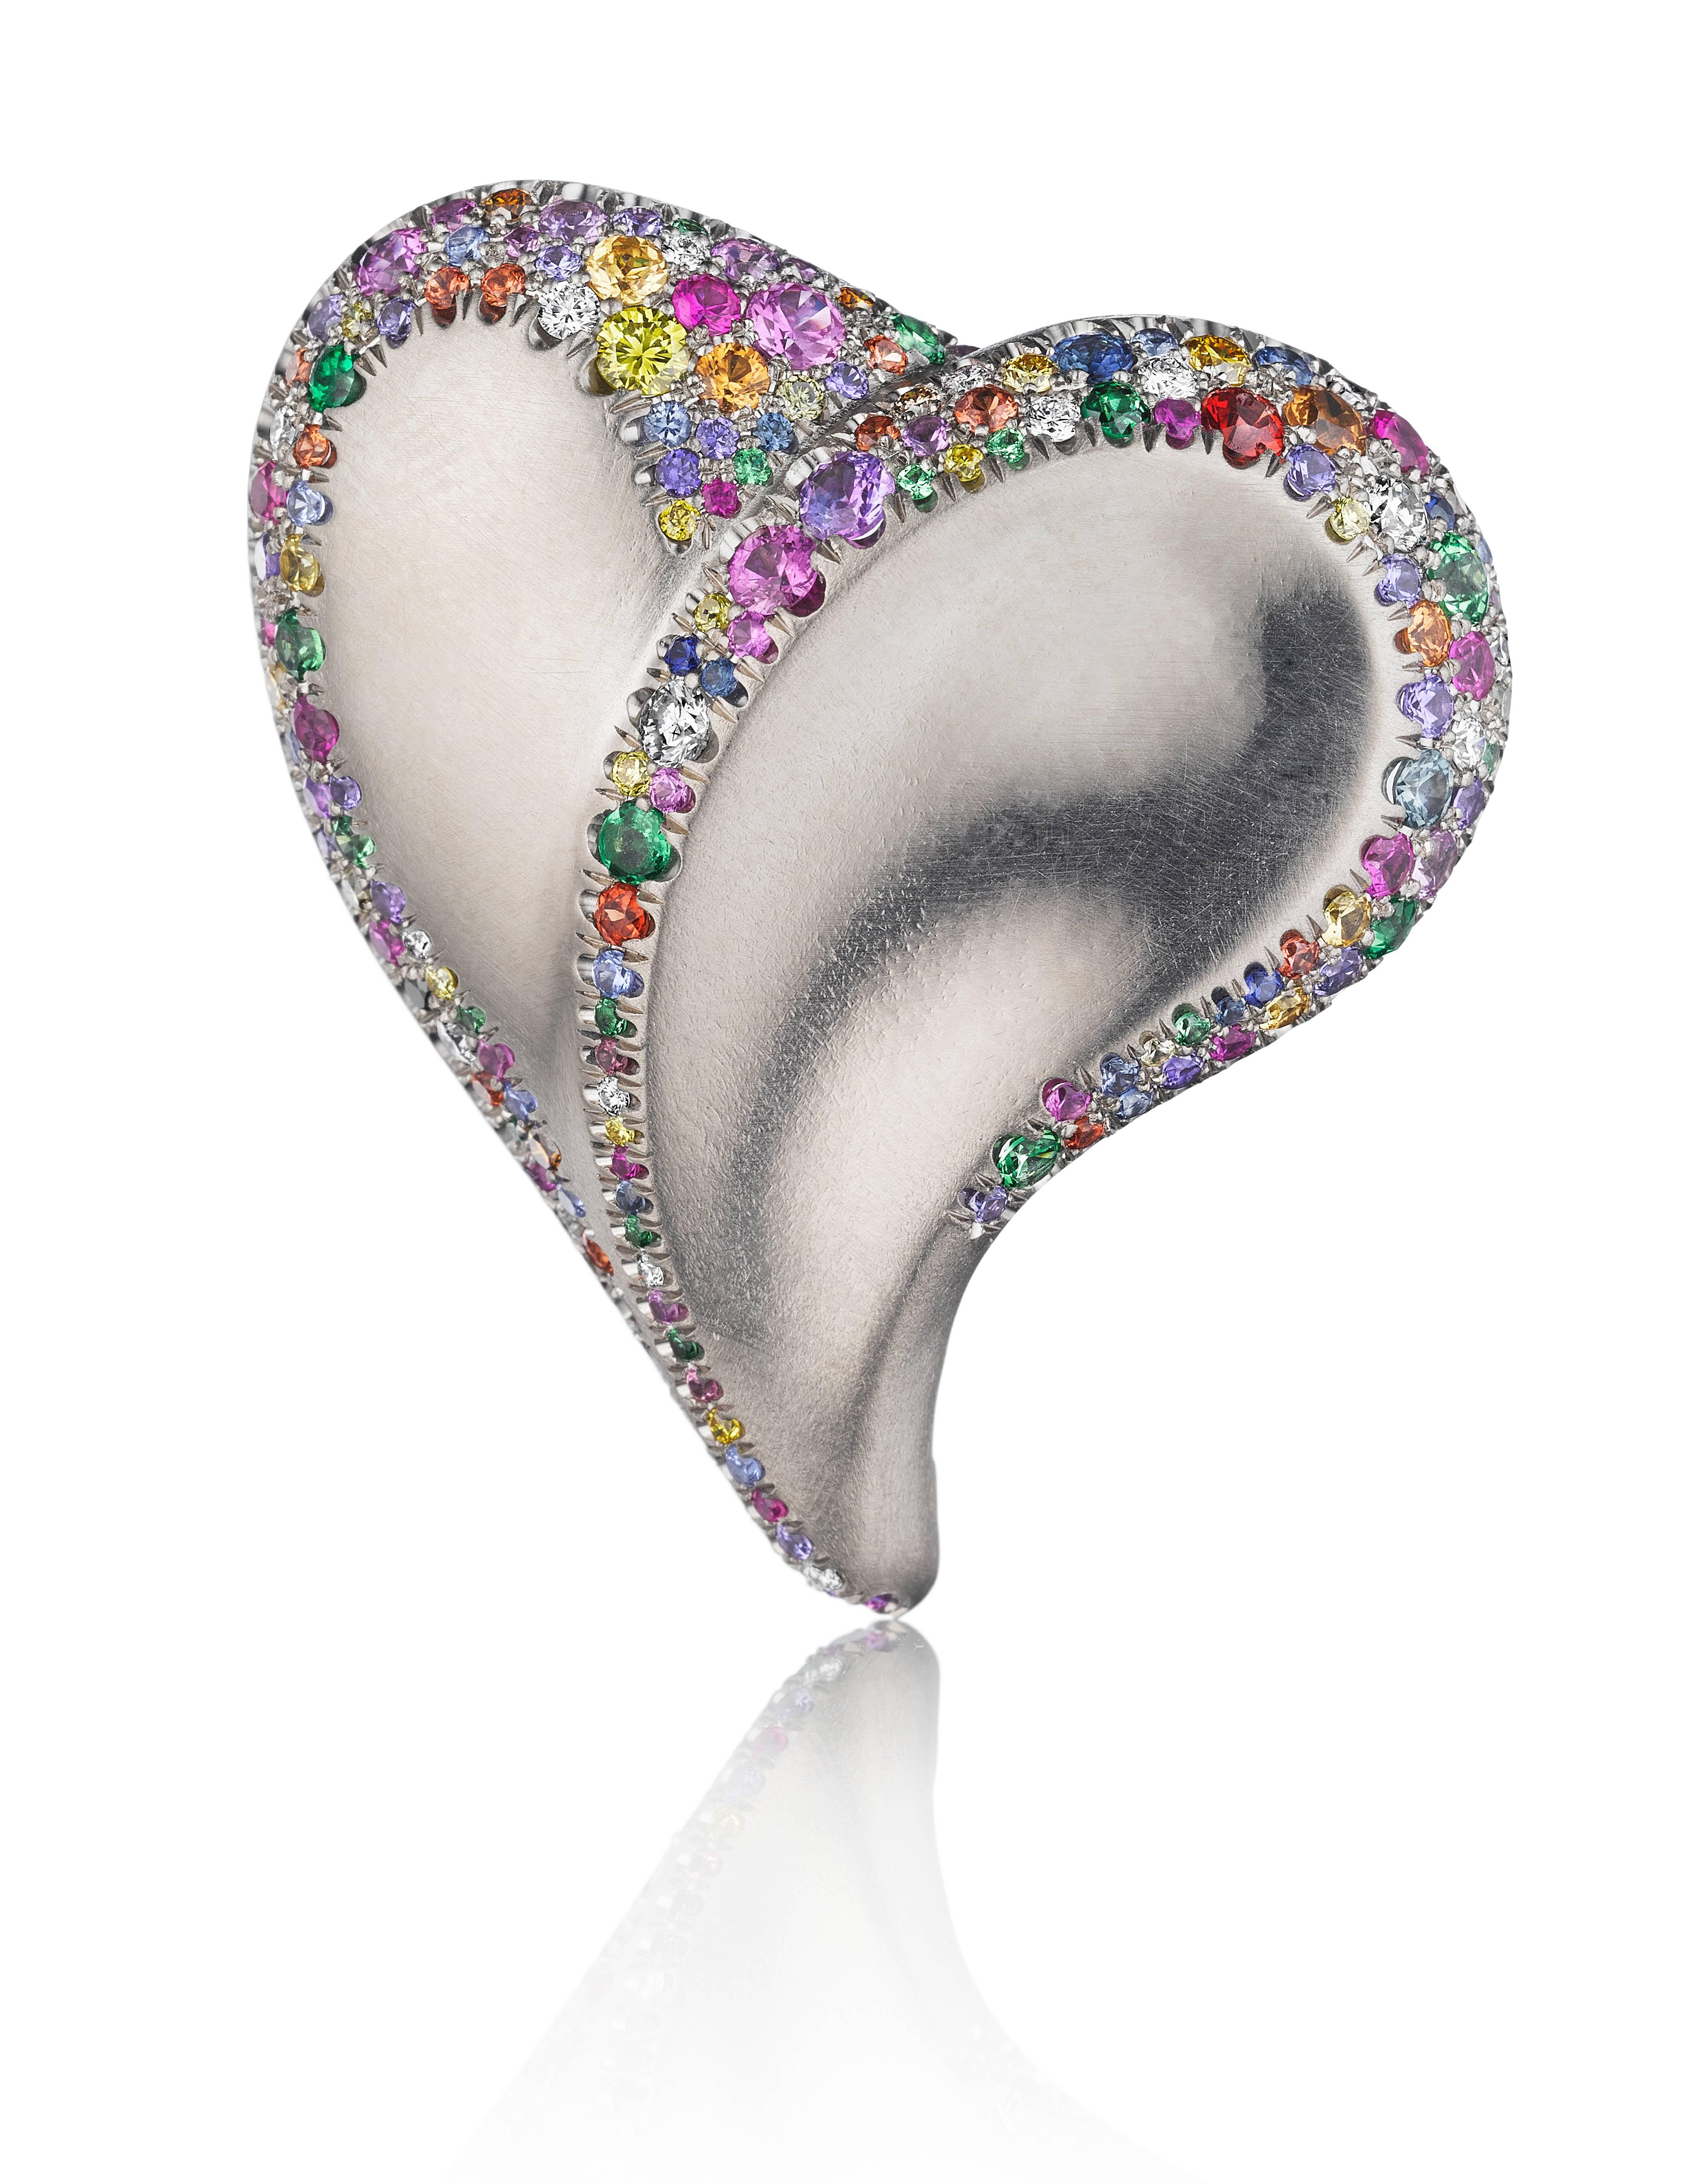 Naomi Sarna Confetti Heart Ring In New Condition For Sale In New York, NY